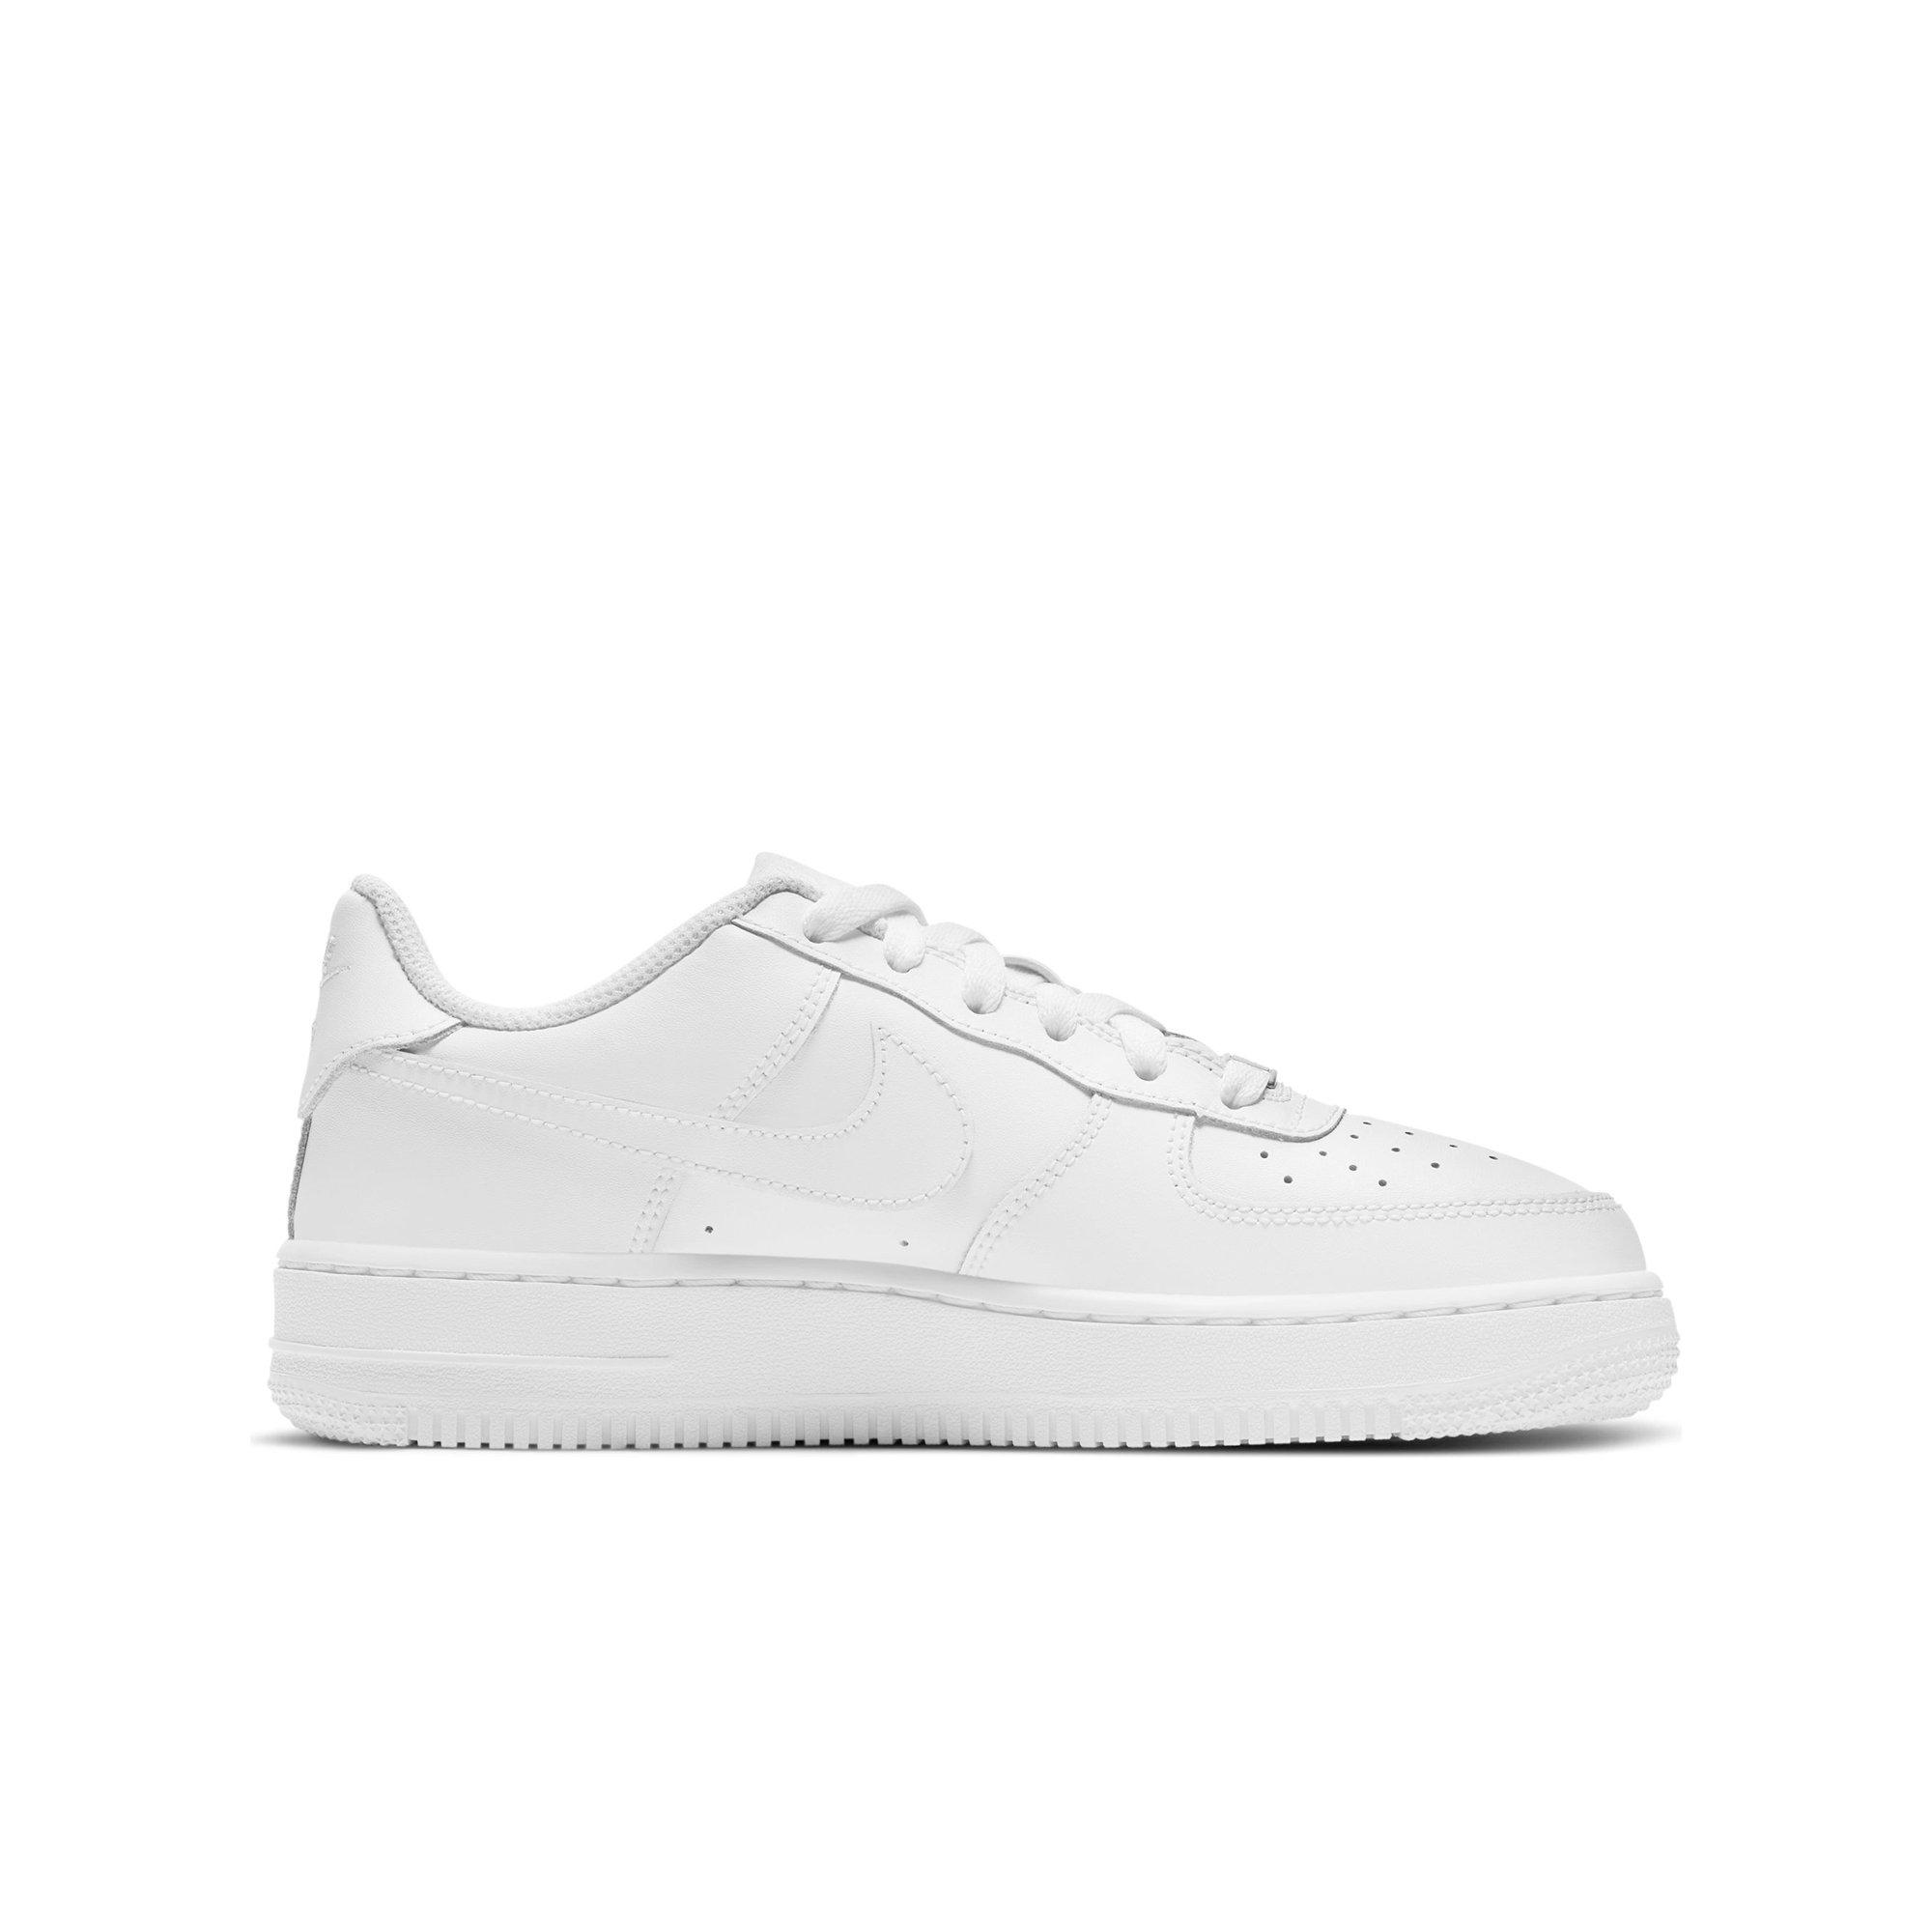 Nike Air Force 1 LE White GS Youth Retro Authentic "SHOE BOX